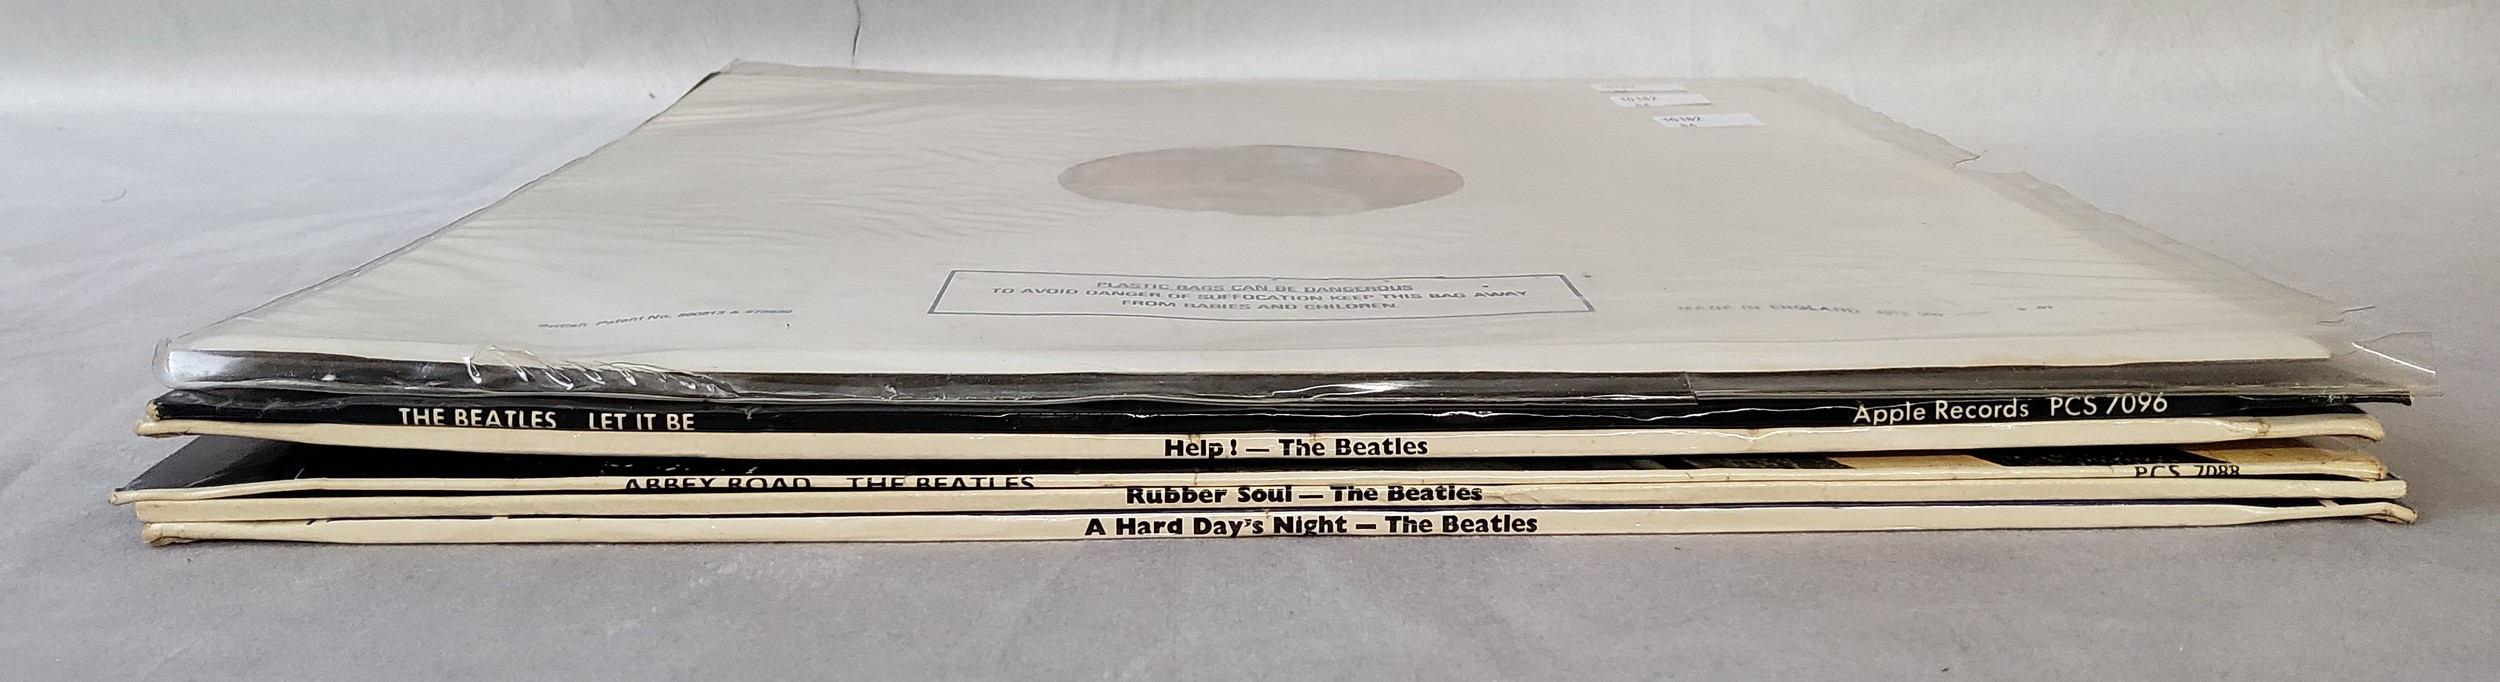 Beatles Vinyl Lps including A Hard Day's Night, Stereo, Parlophone PCS 3058, matrix YEX 126-1; Help! - Image 2 of 2